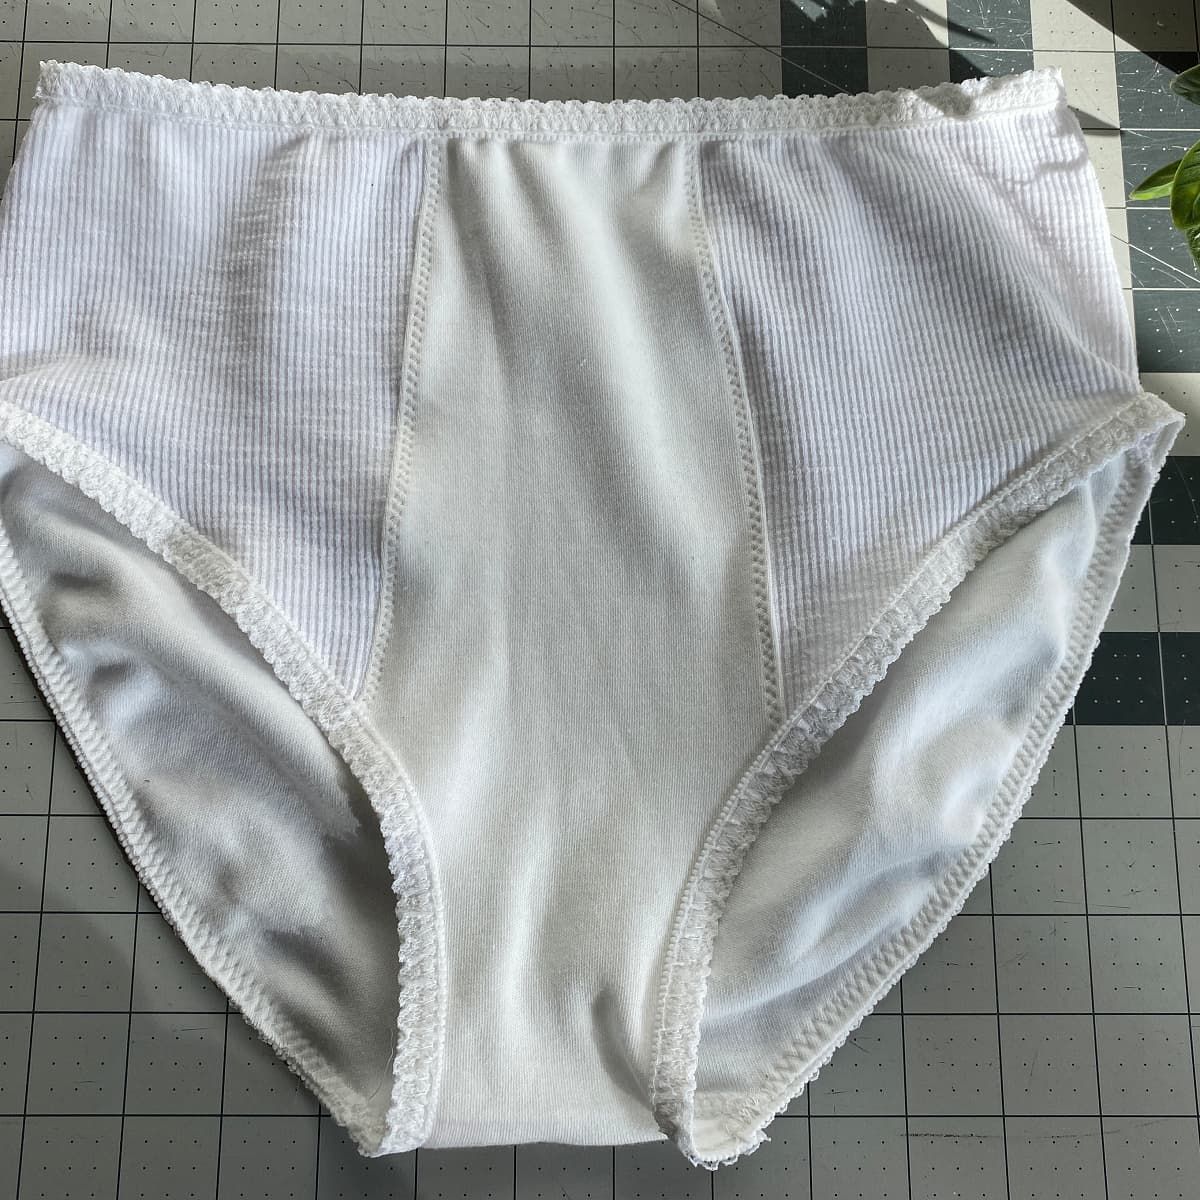 DIY panties tutorial (plus how to sew knits and how to attach elastic)